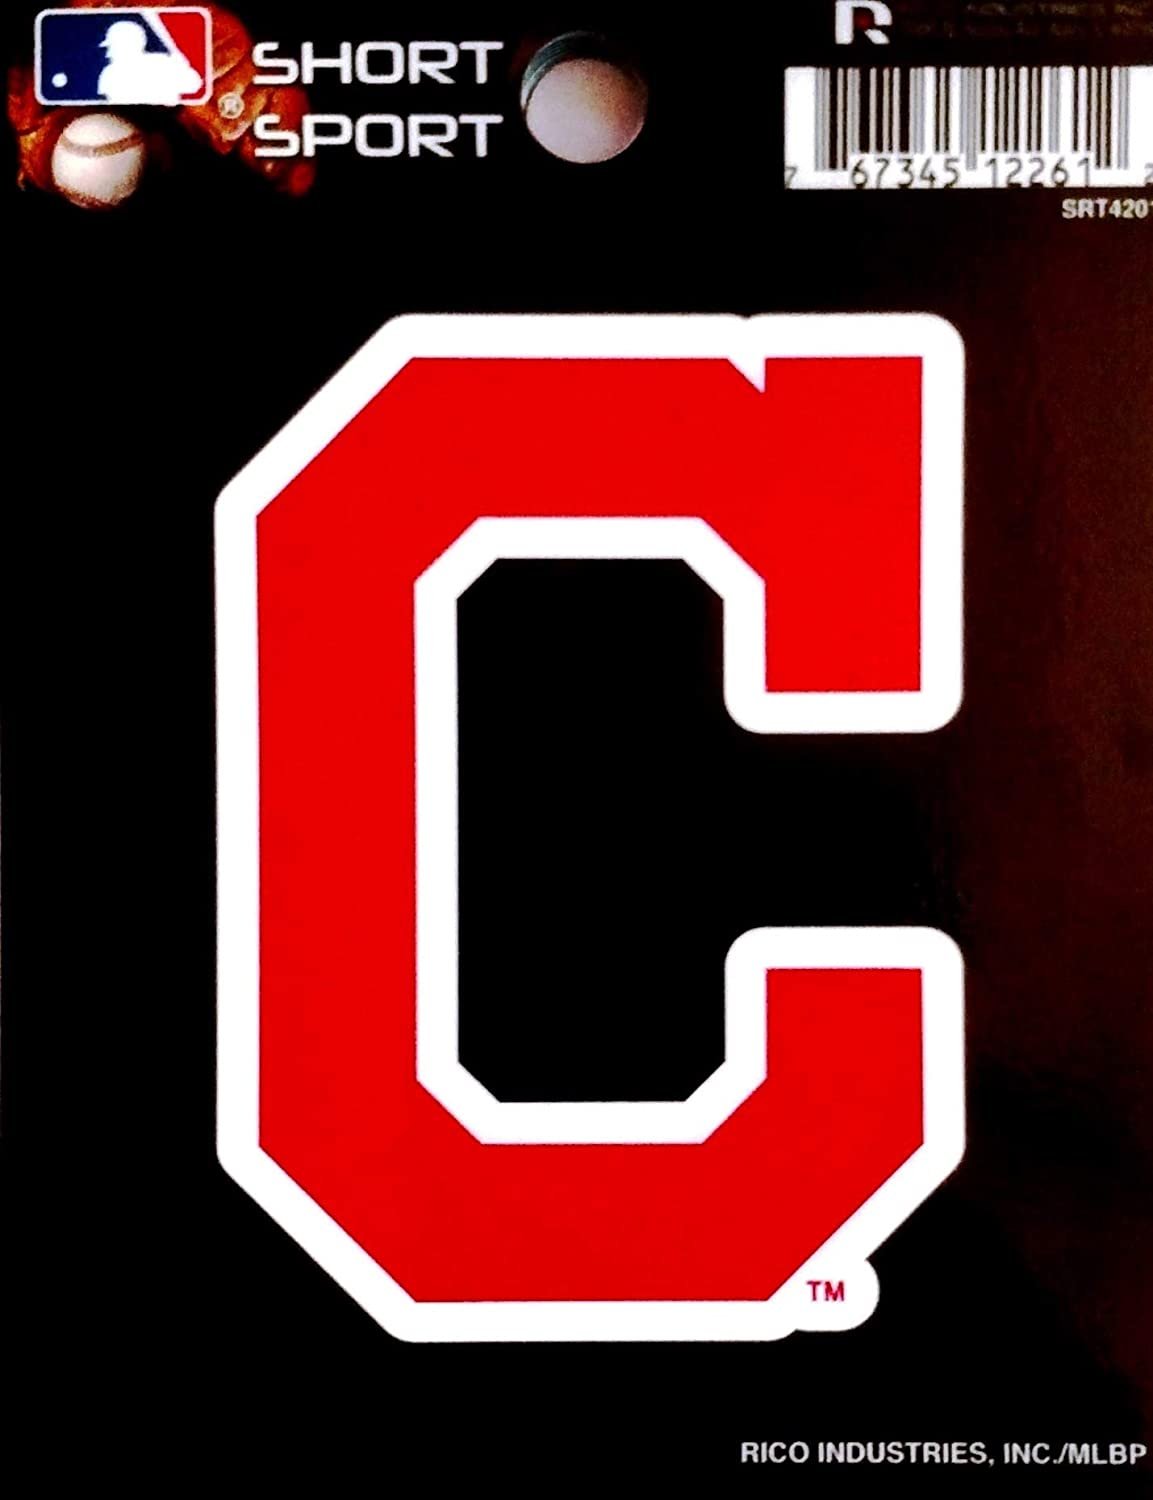 Cleveland Indians 3 Inch Sticker Decal, Full Adhesive Backing, Easy Peel and Stick Application